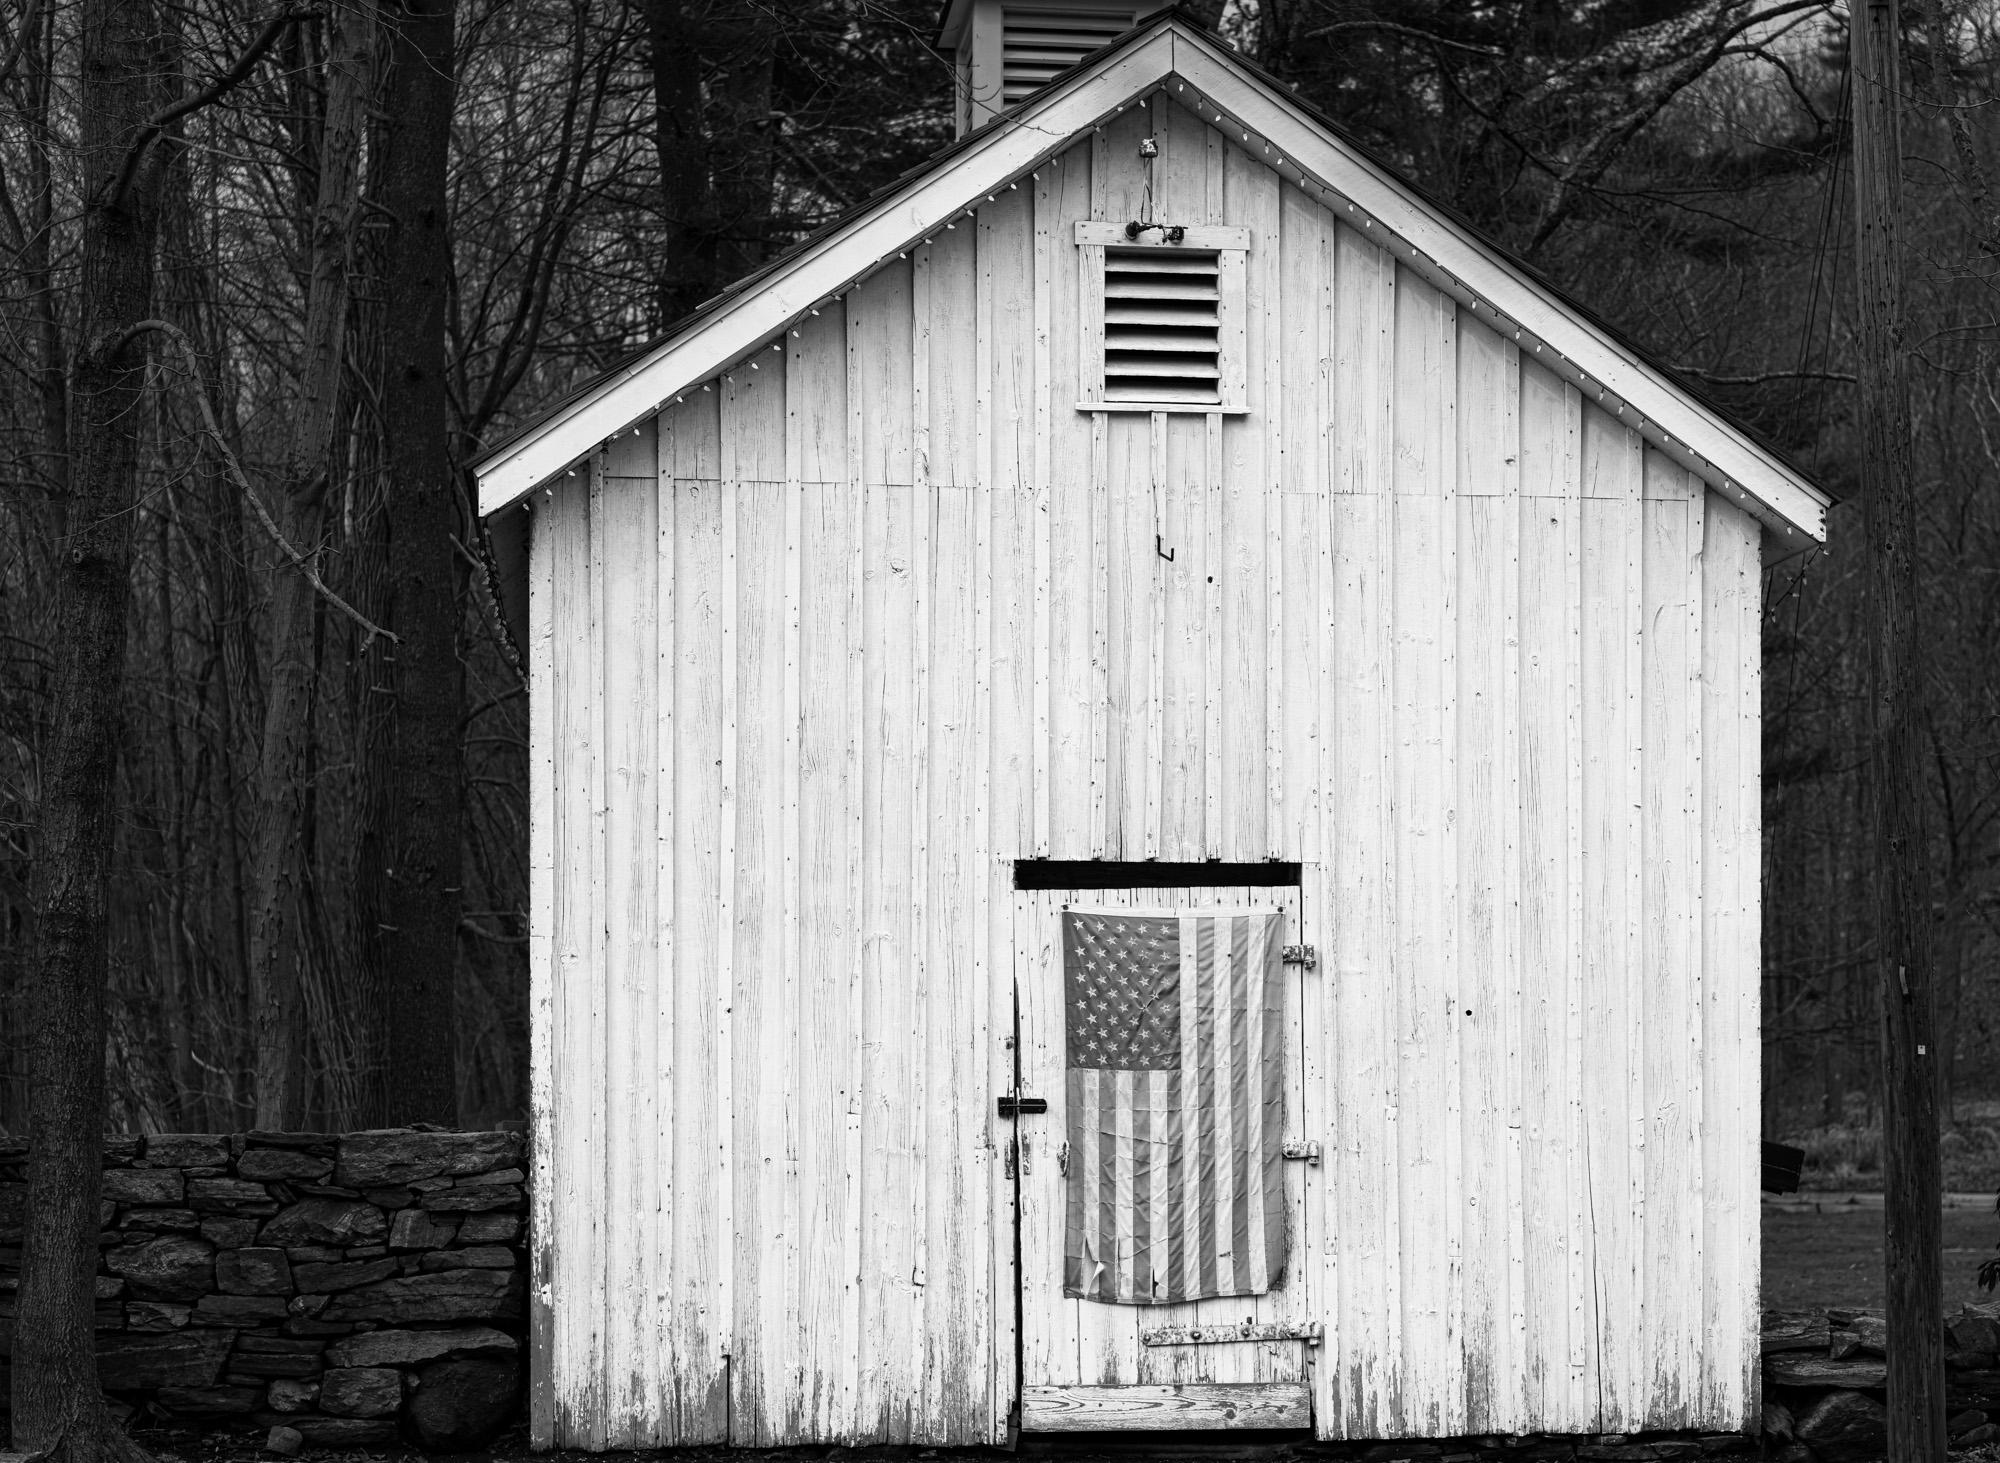 Howard Lewis Landscape Photograph -  Limited Edition Black and White Photograph - "American Barn", 2022 20 x 24